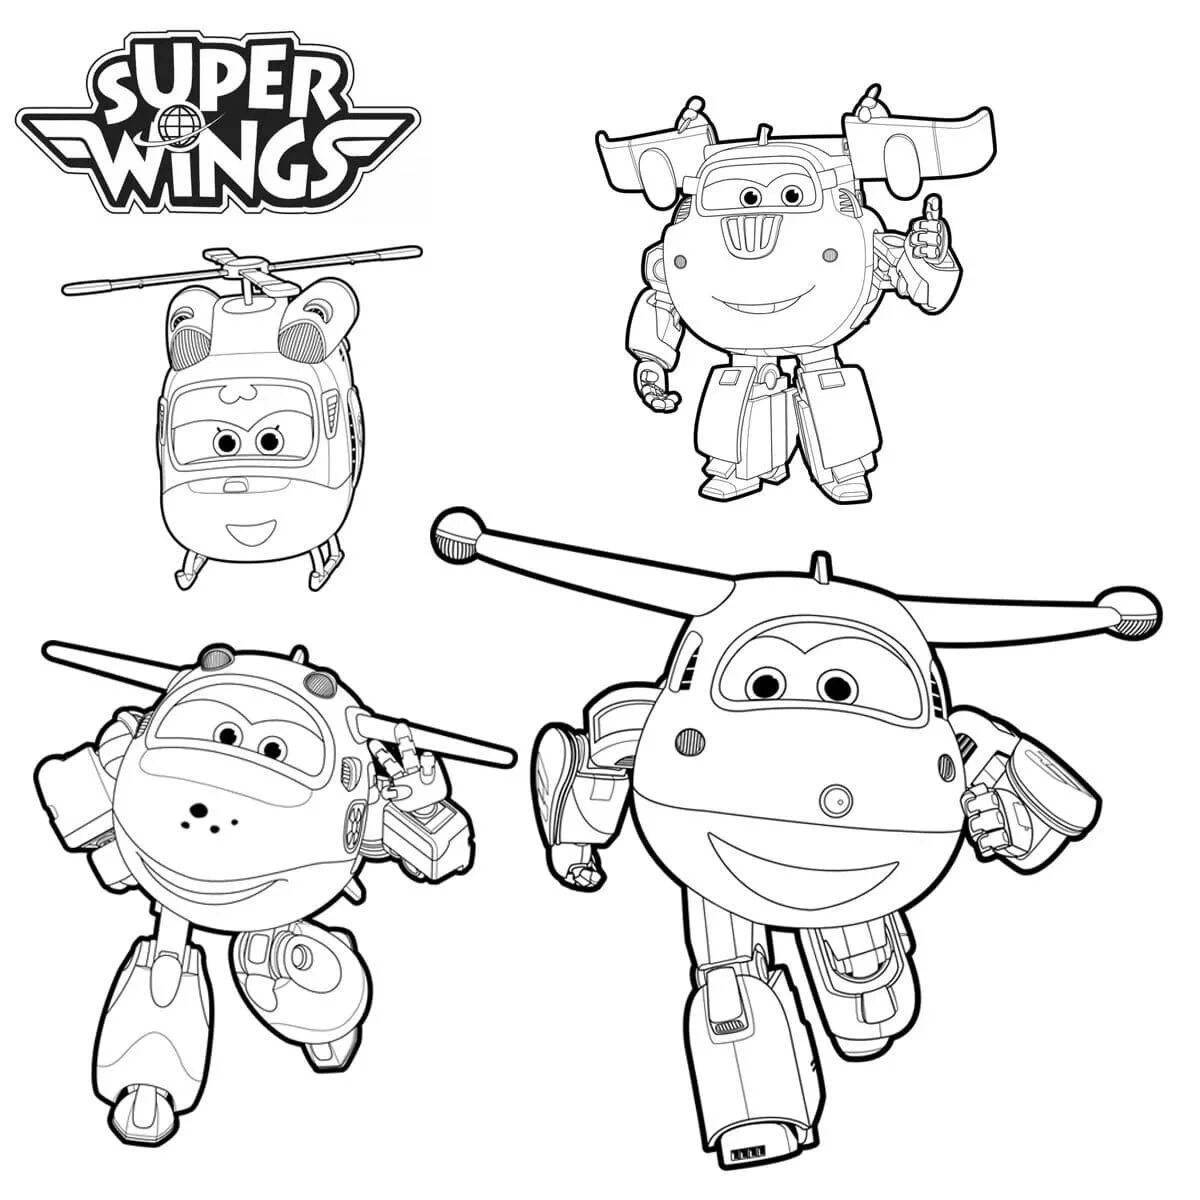 Coloring page glamorous donnie super wings